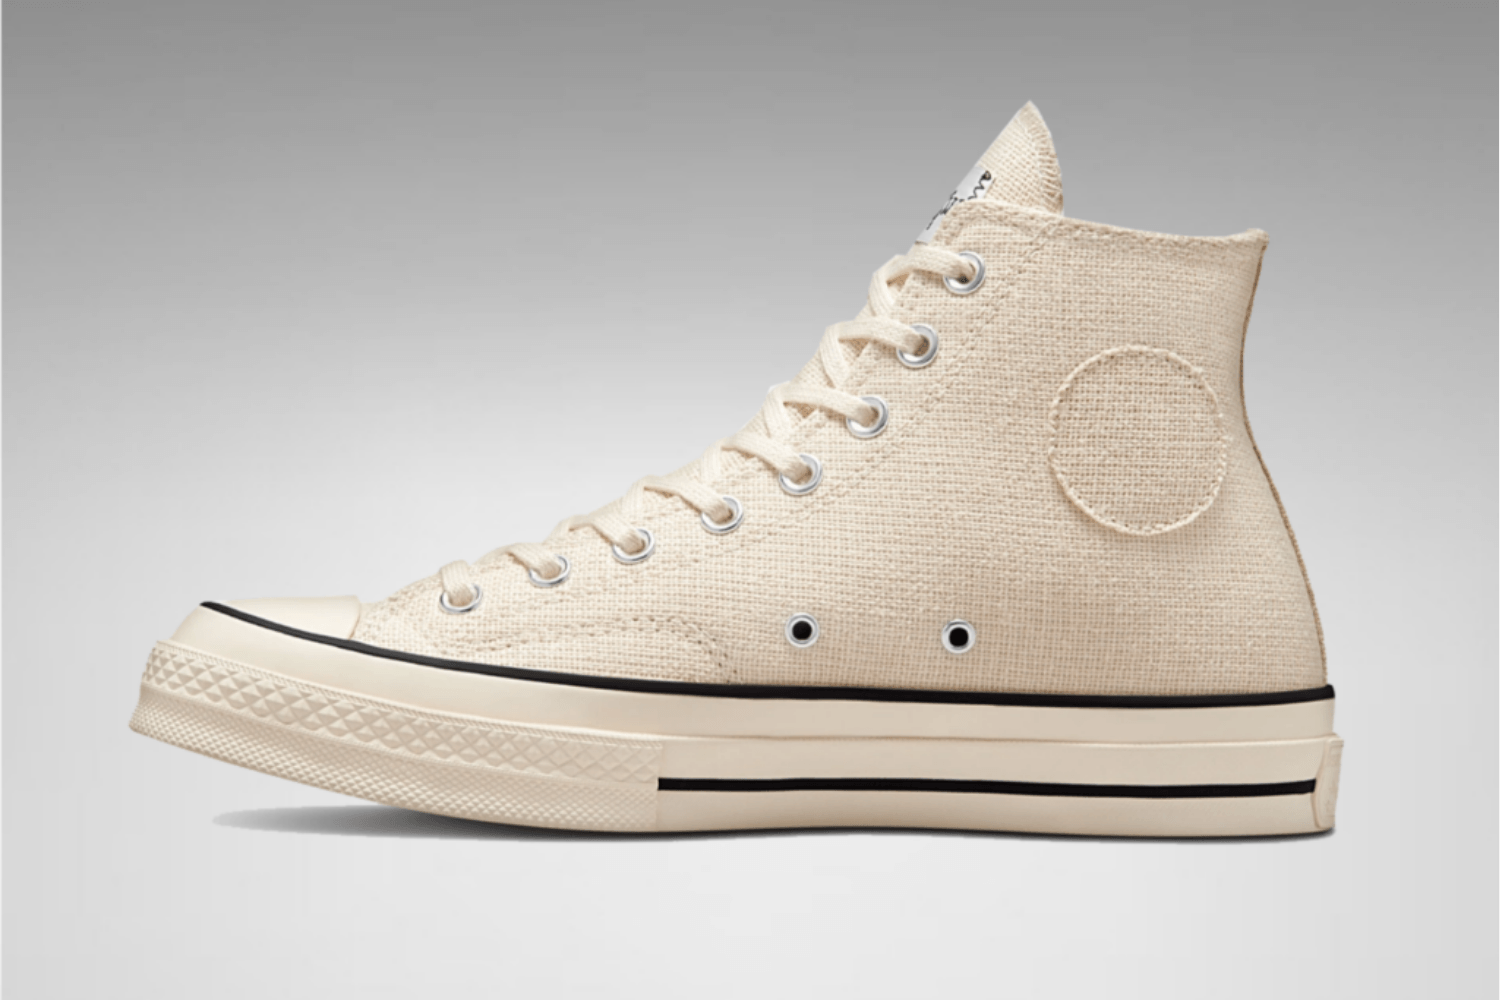 Stüssy and Converse launch their new Chuck 70